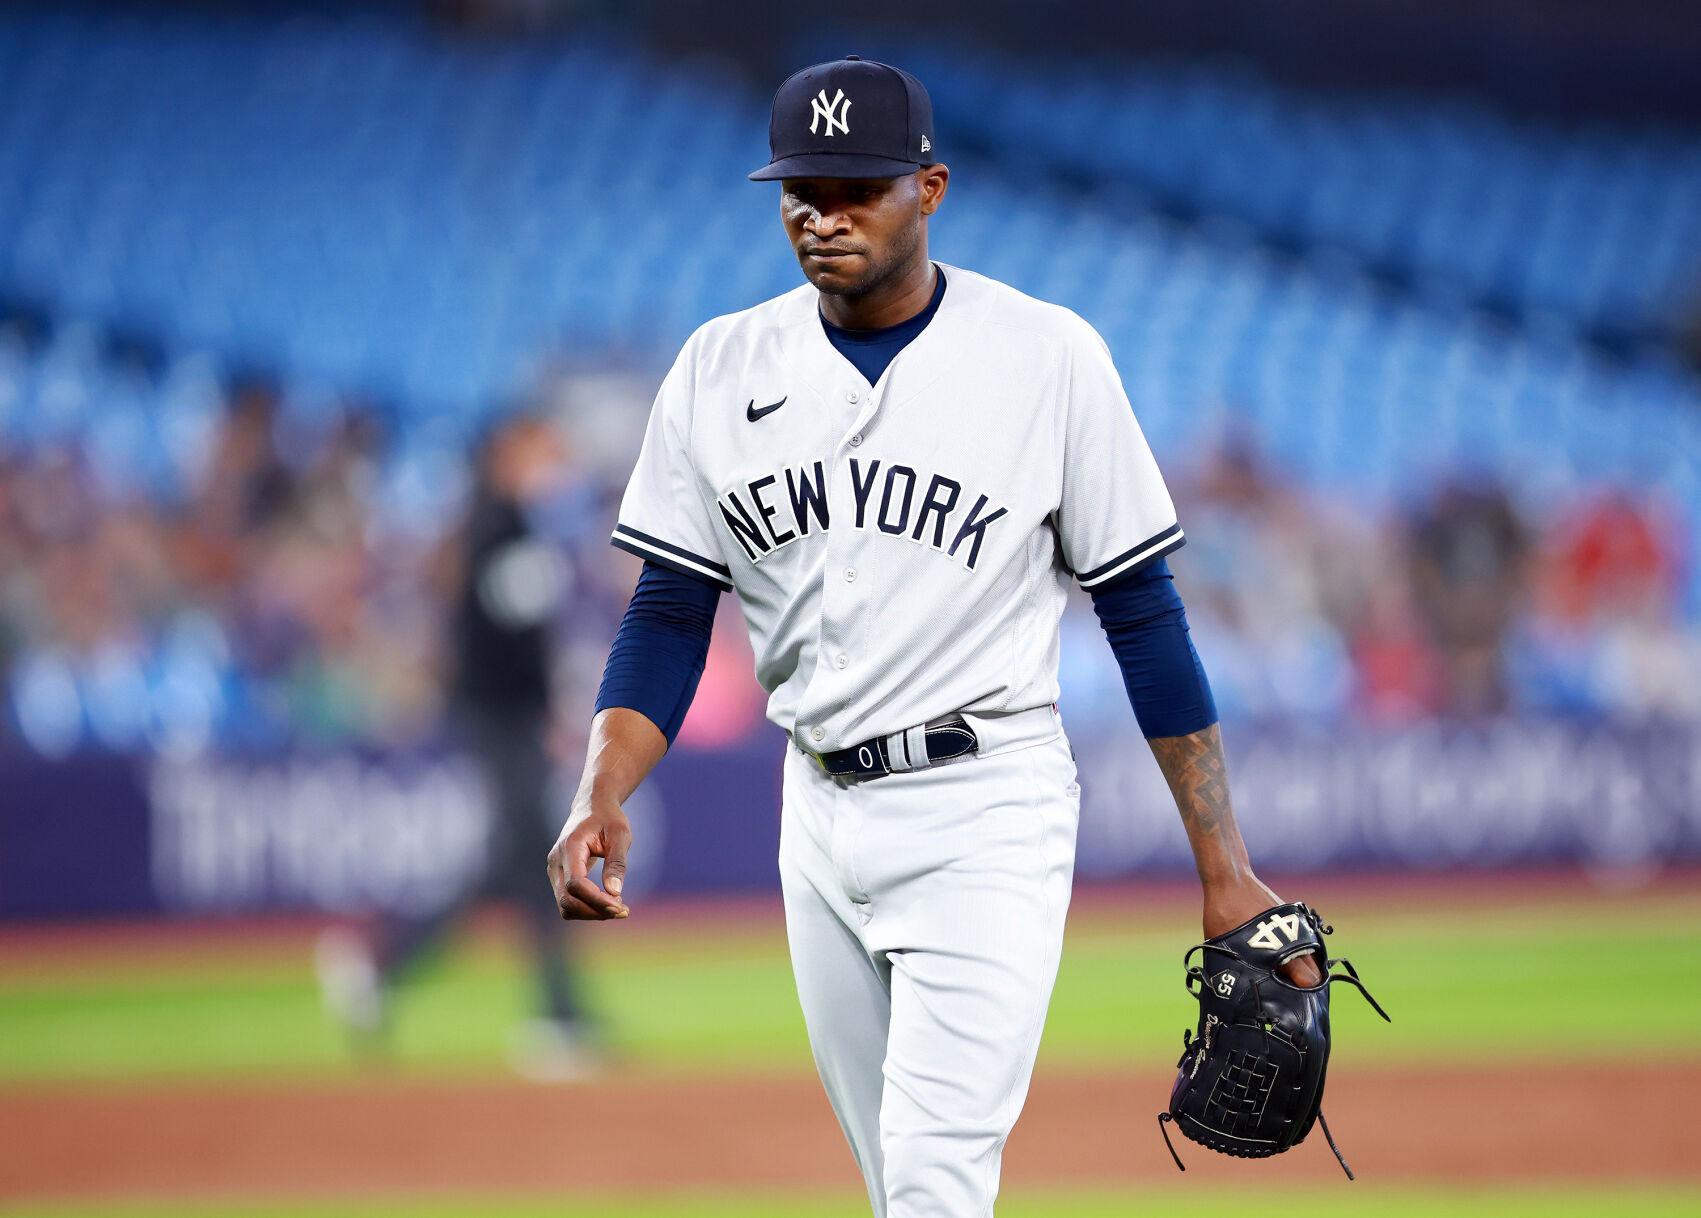 Yankees place Domingo Germán on restricted list for alcohol abuse